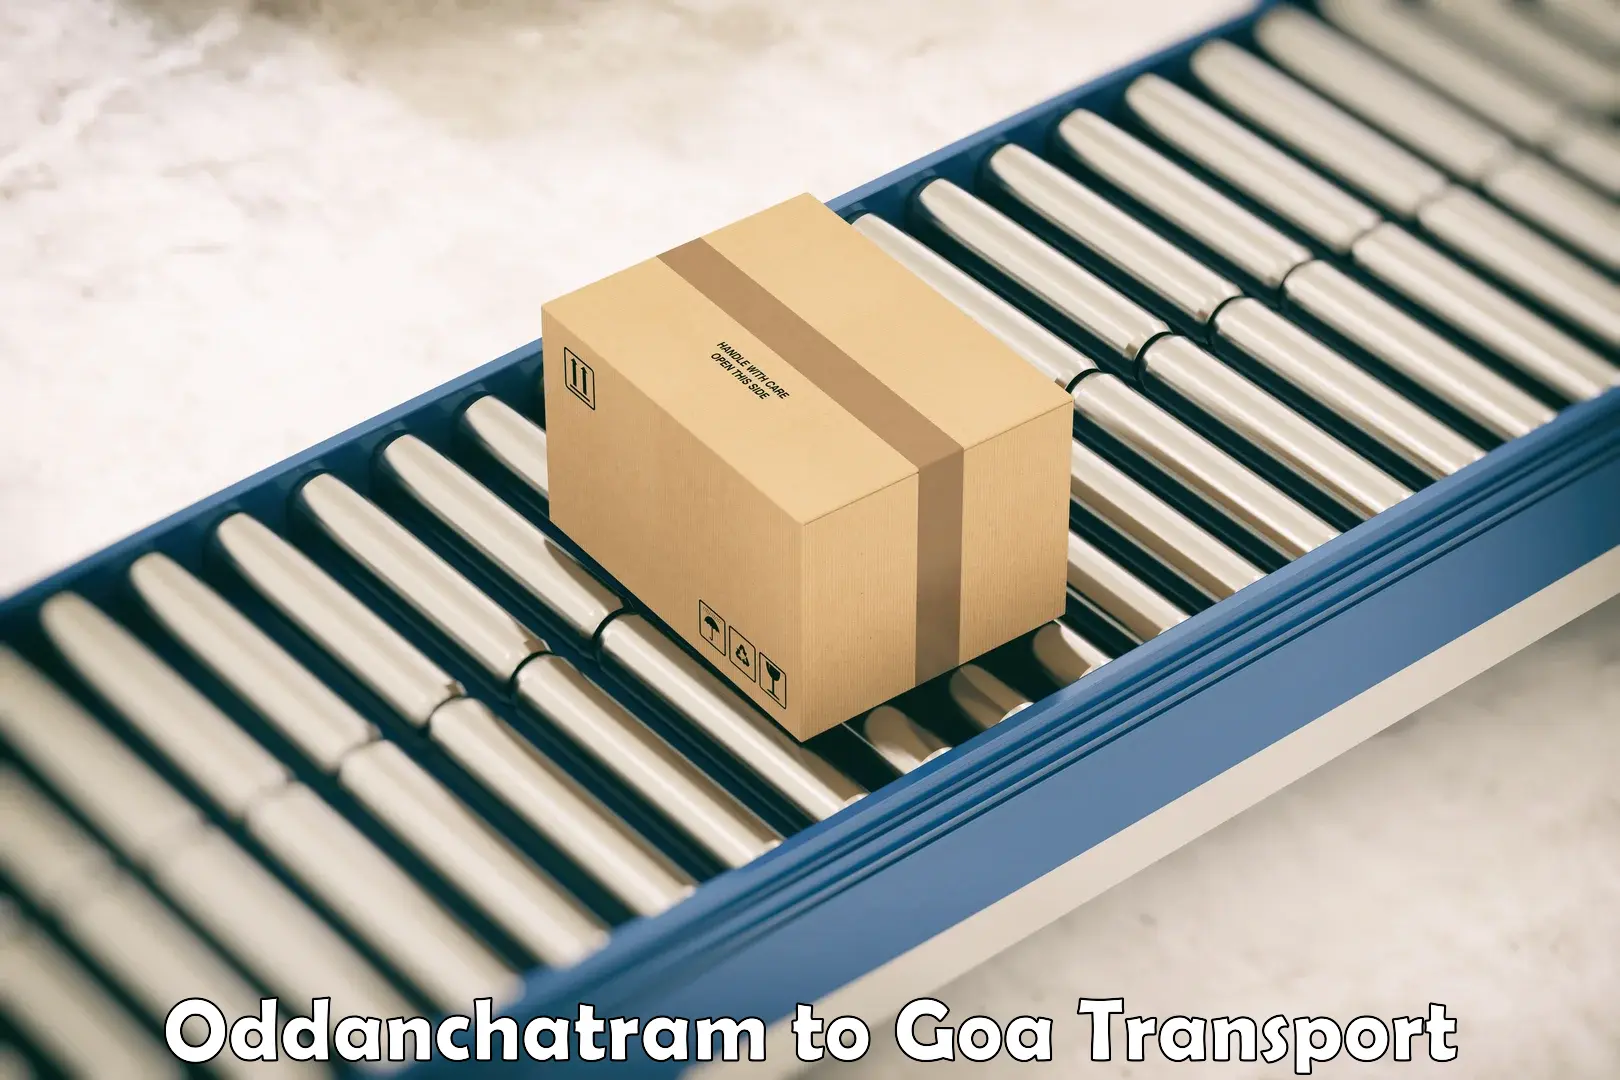 Container transport service Oddanchatram to South Goa